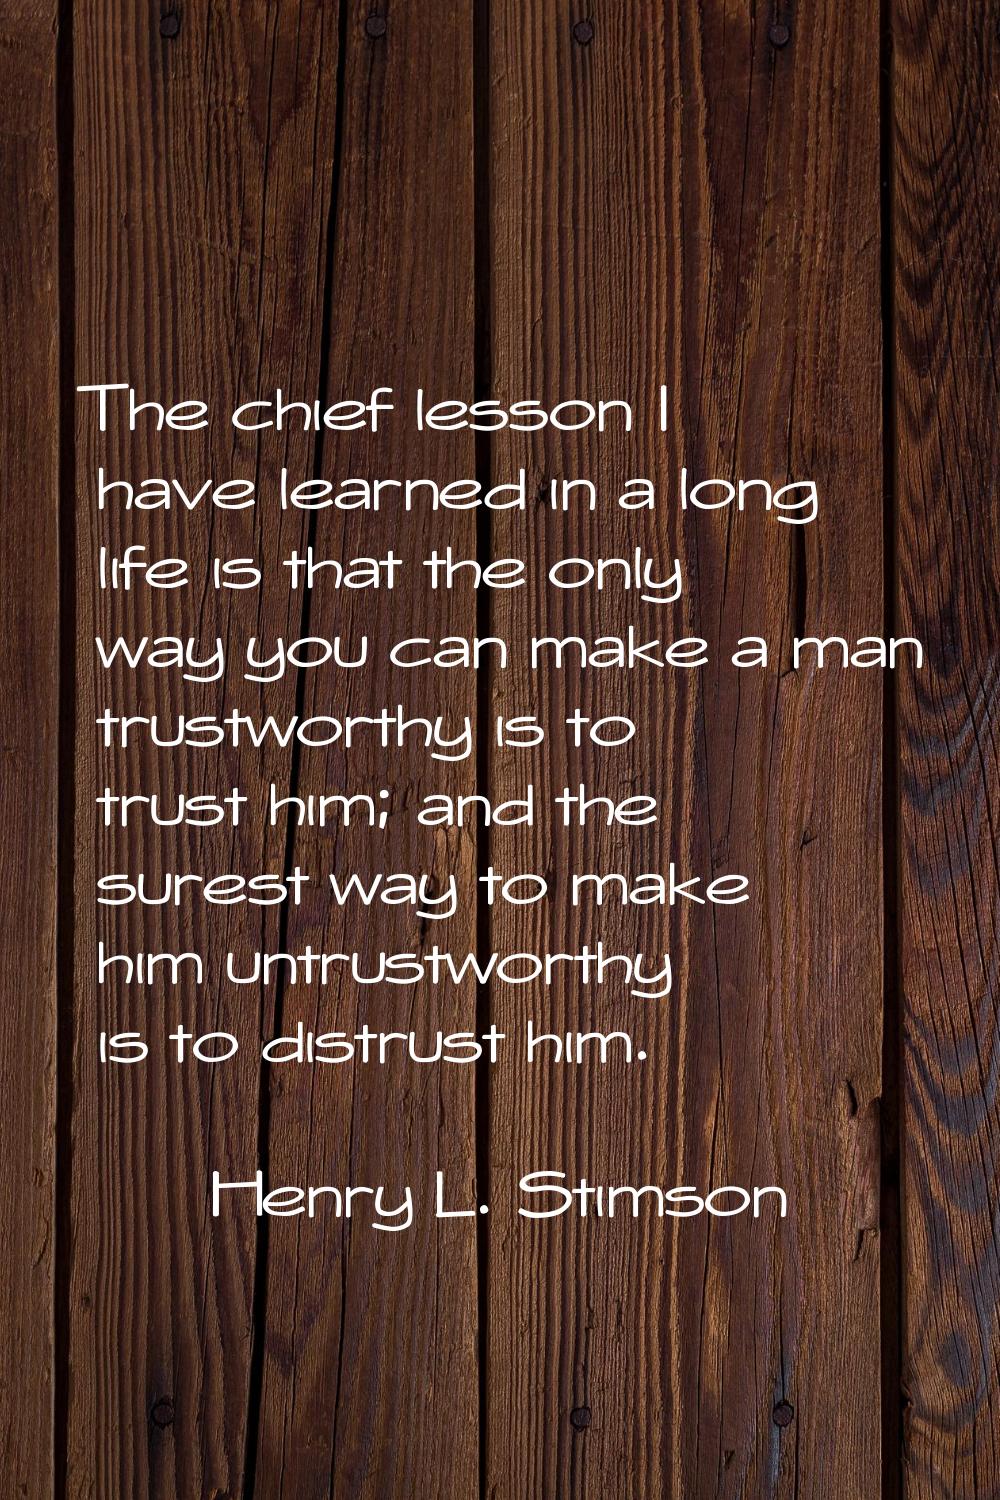 The chief lesson I have learned in a long life is that the only way you can make a man trustworthy 